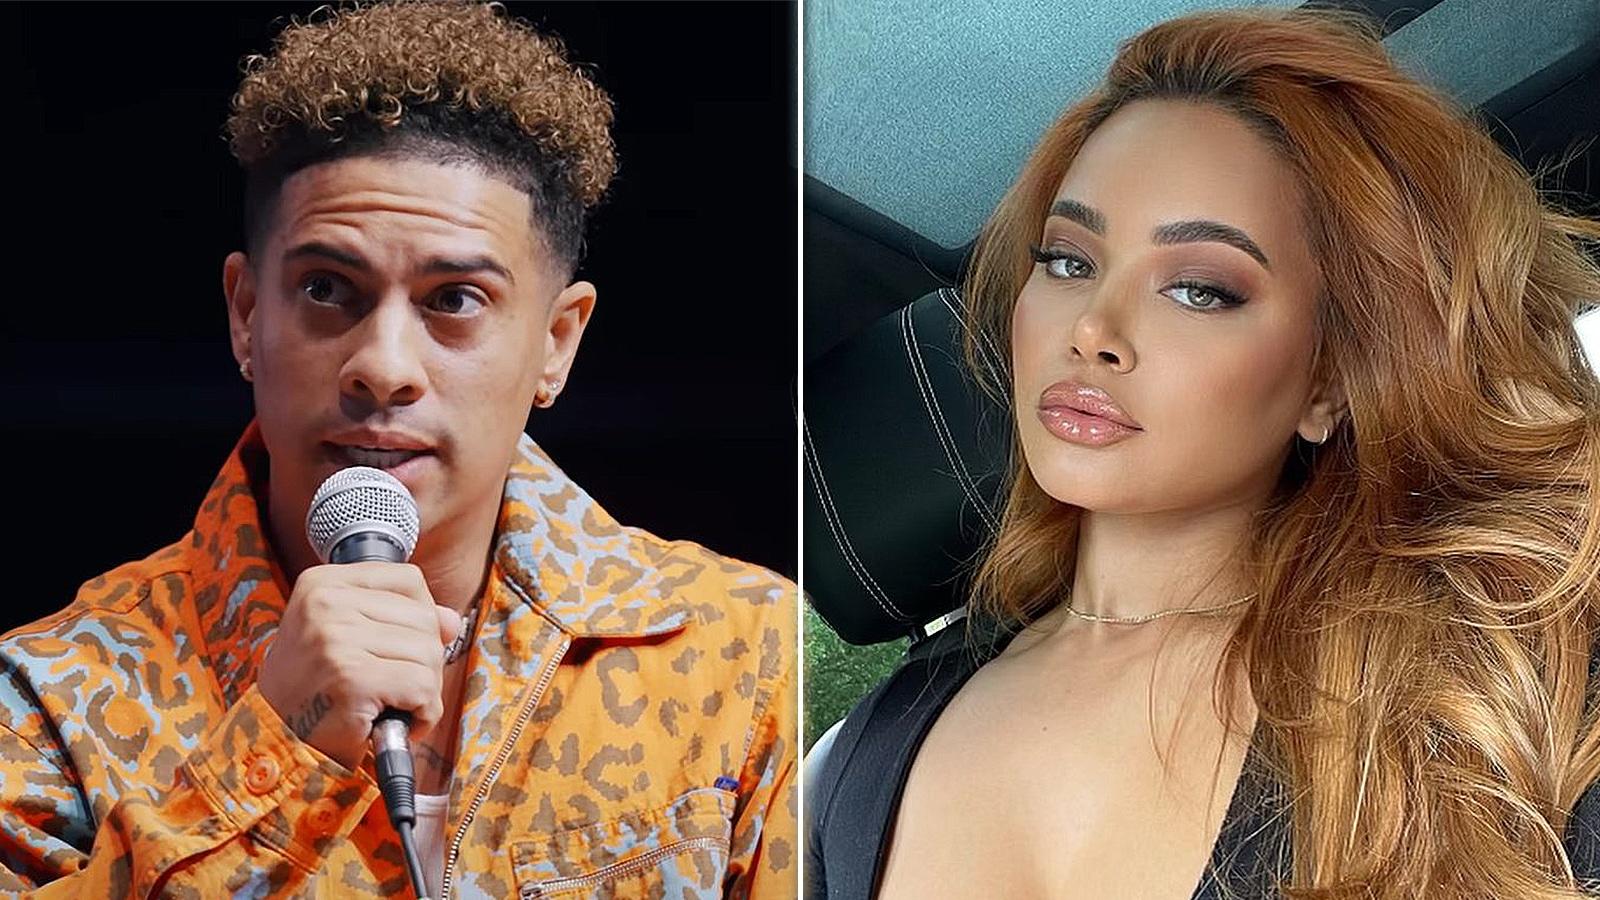 Shyla Walker levies serious allegations against austin mcbroom